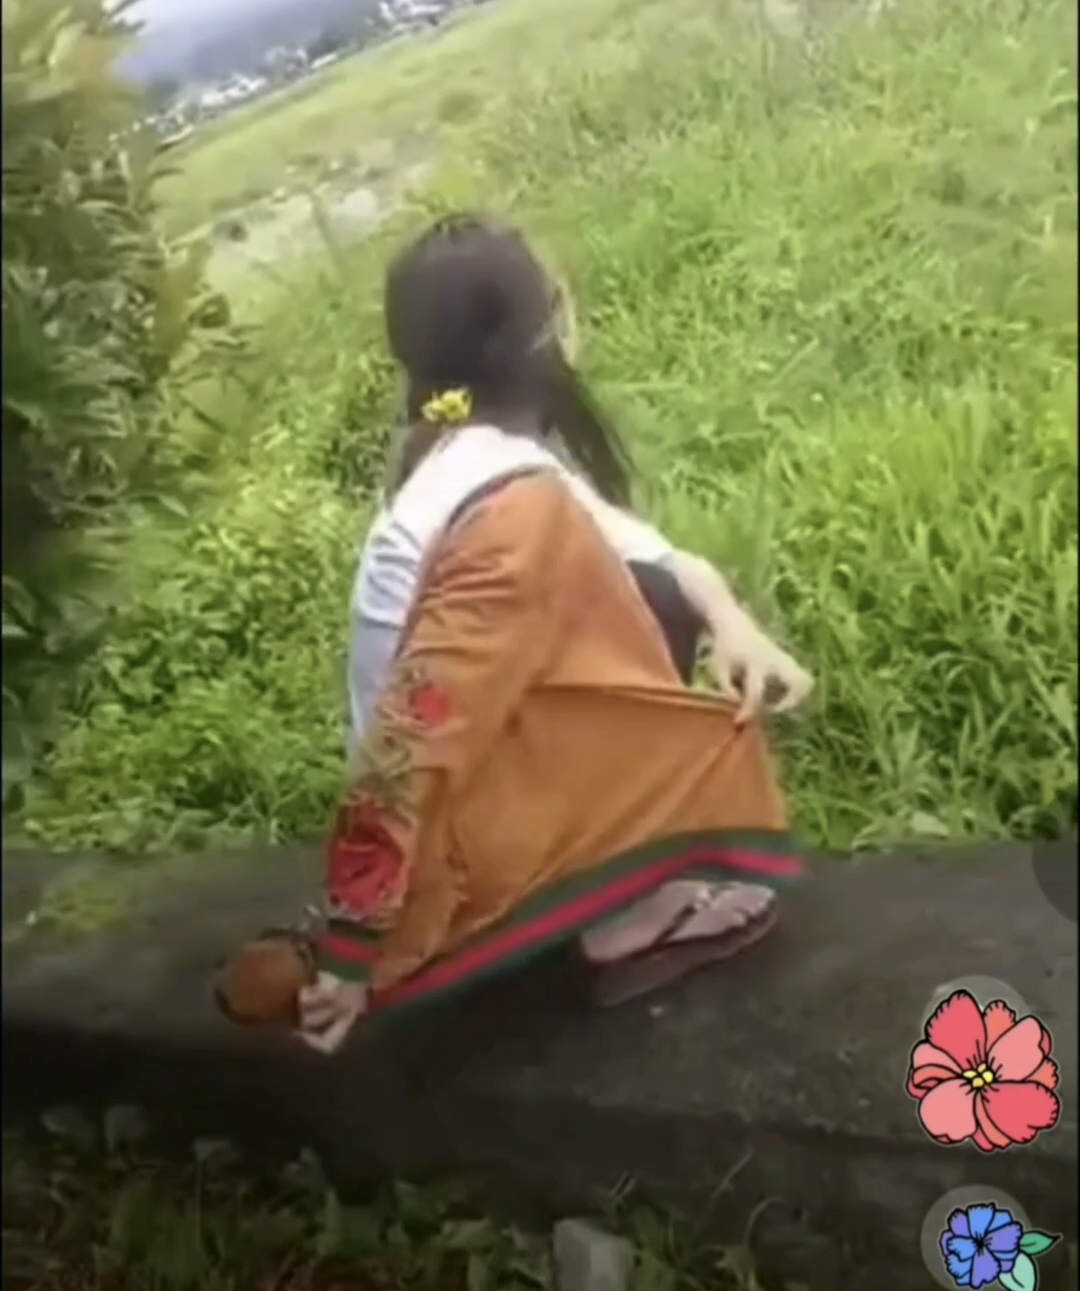 Northeast Indian pissing on 2022 New Year Picnic Spot.